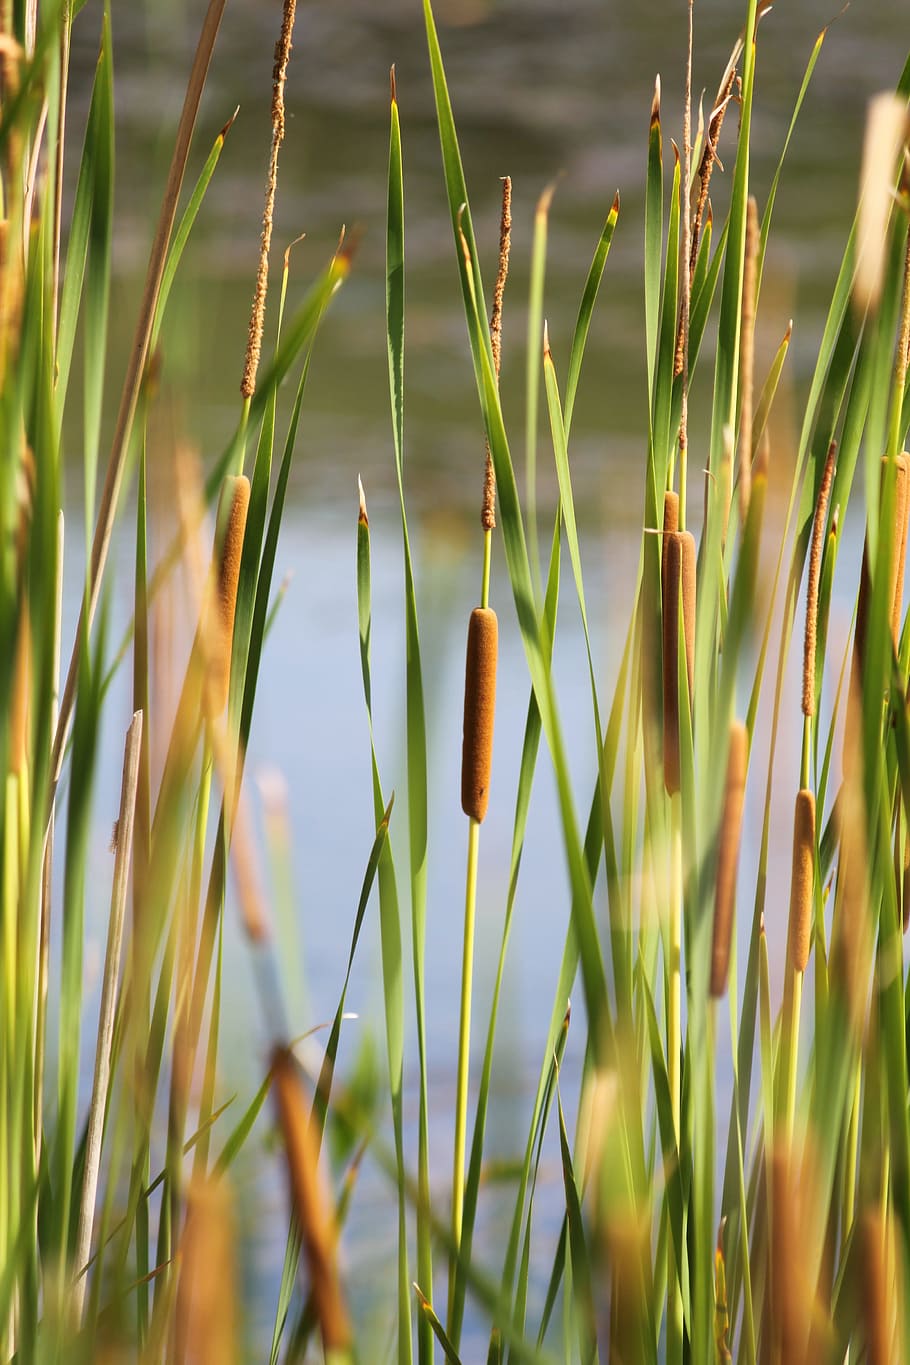 Cattail, Pond, Nature, Lake, Grass, water, outdoor, swamp, wetland, growth